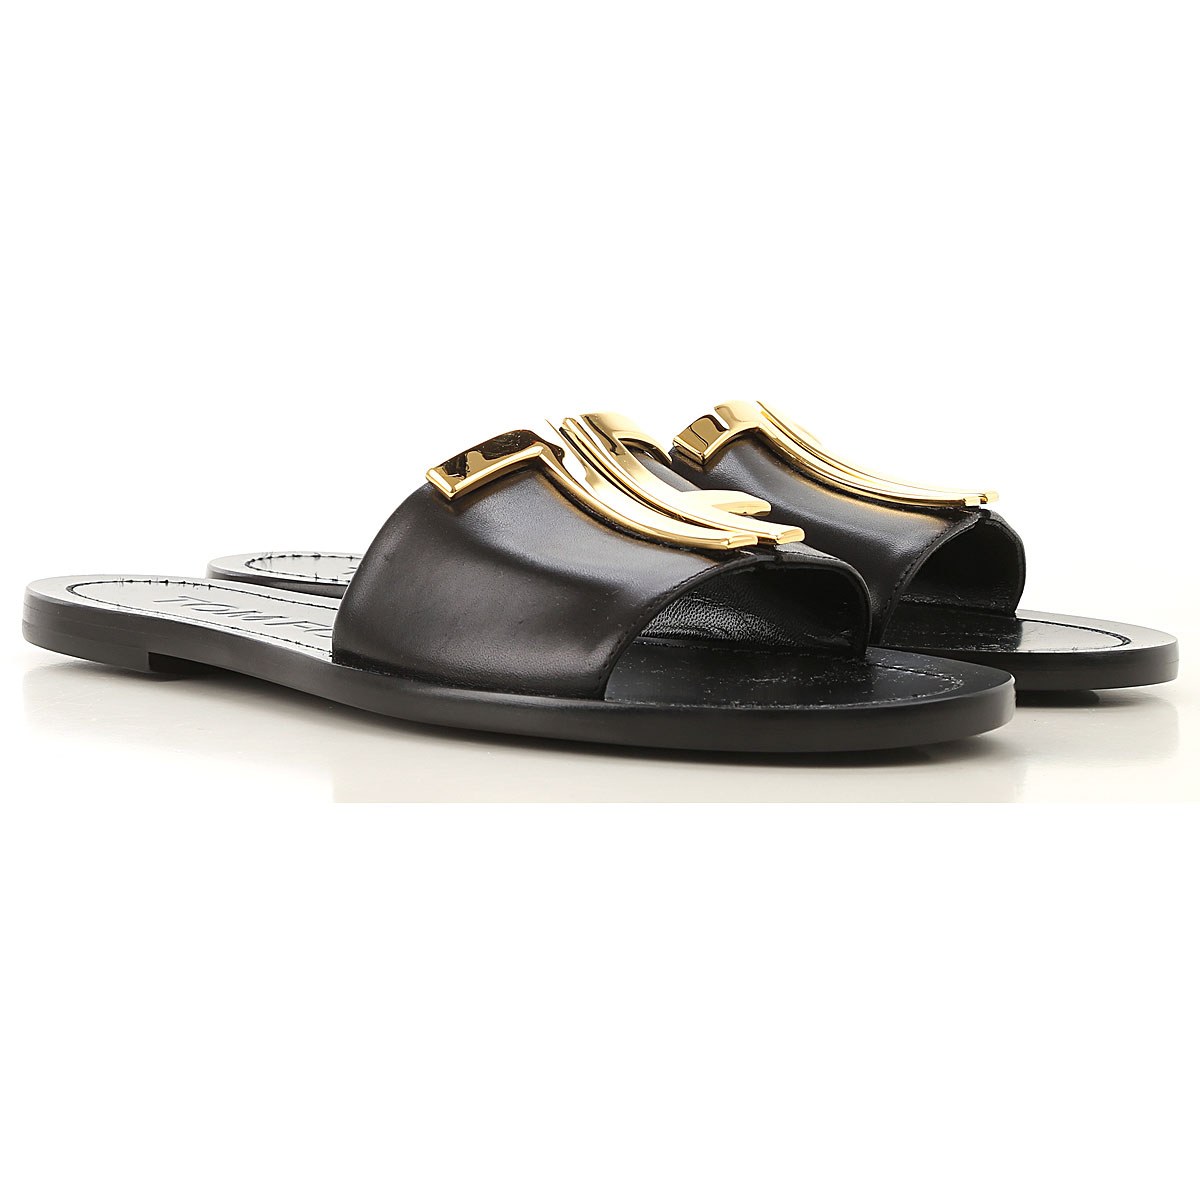 Womens Shoes Tom Ford, Style code: w208t-vax-blk